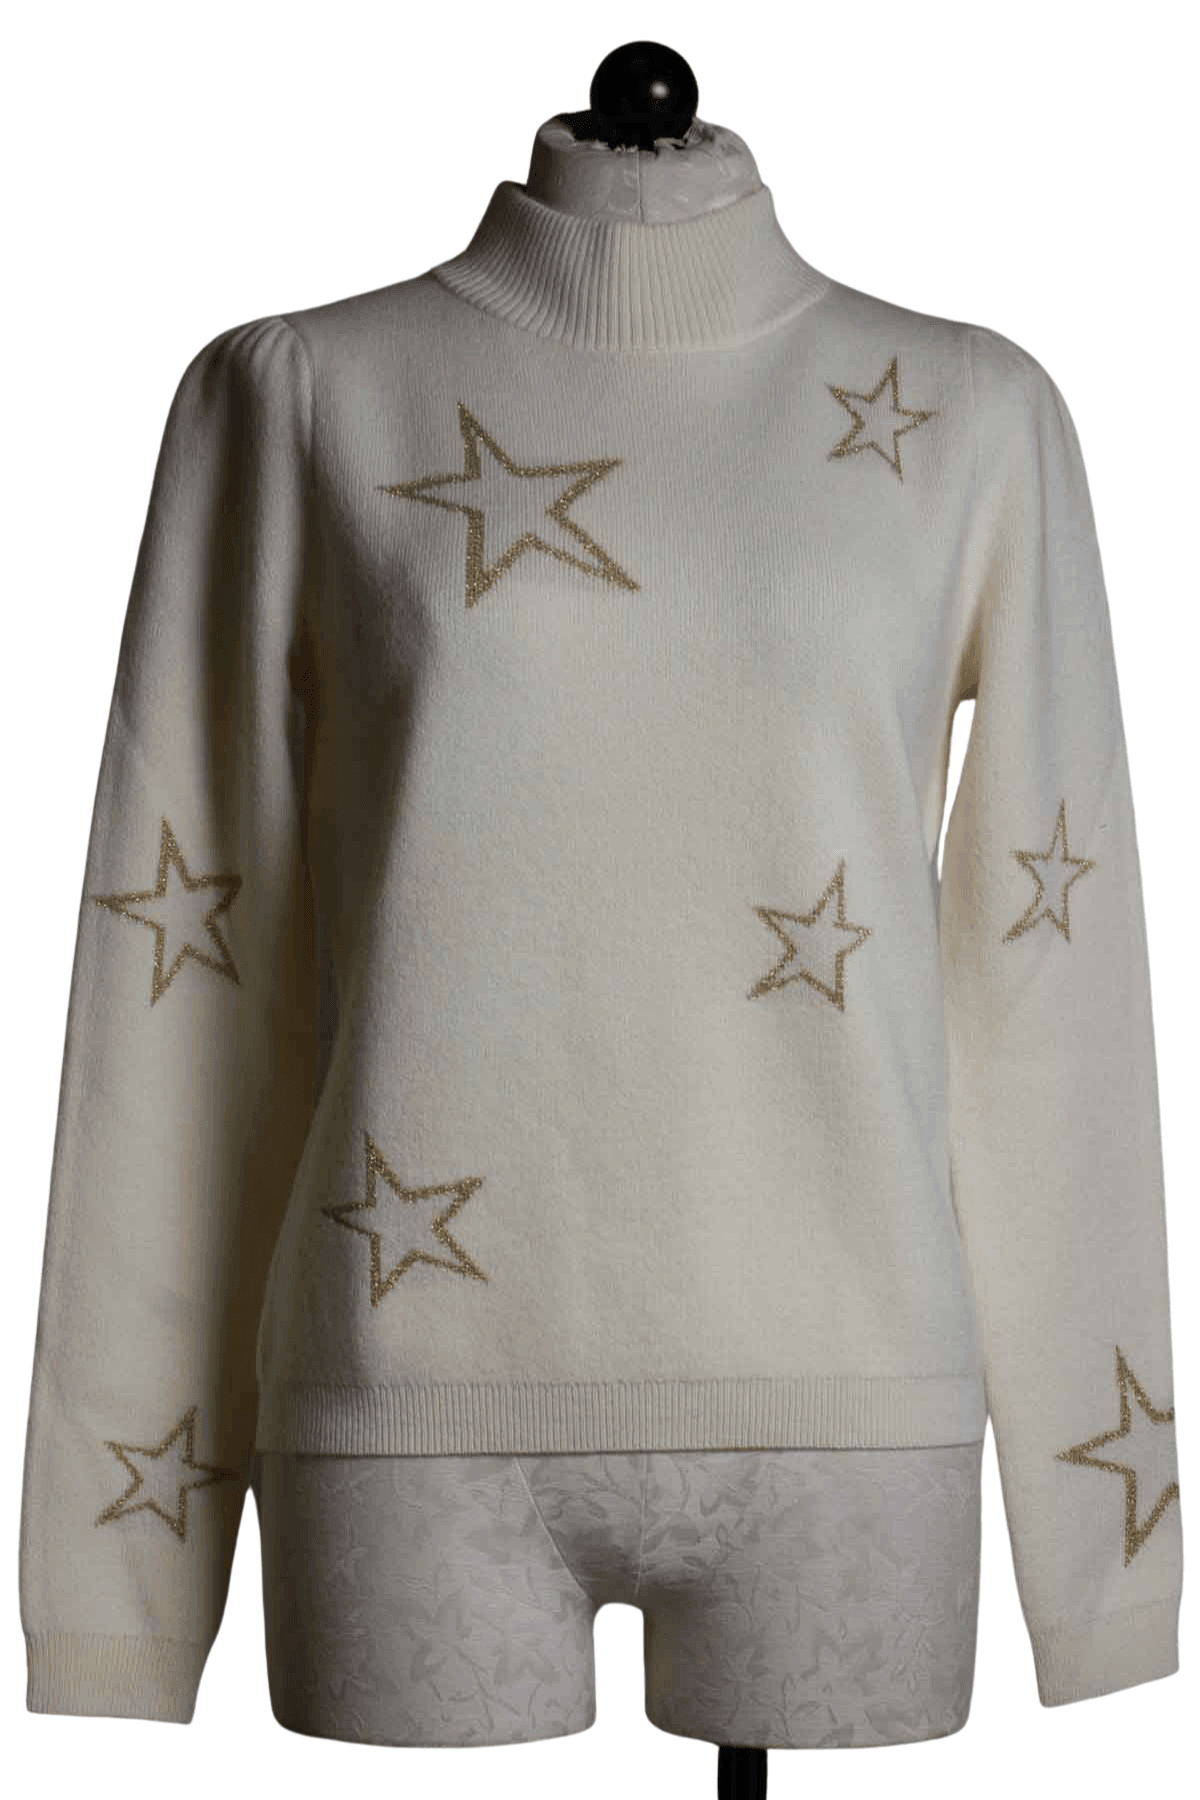 Cream mock neck sweater by Generation Love with gold outlined stars 